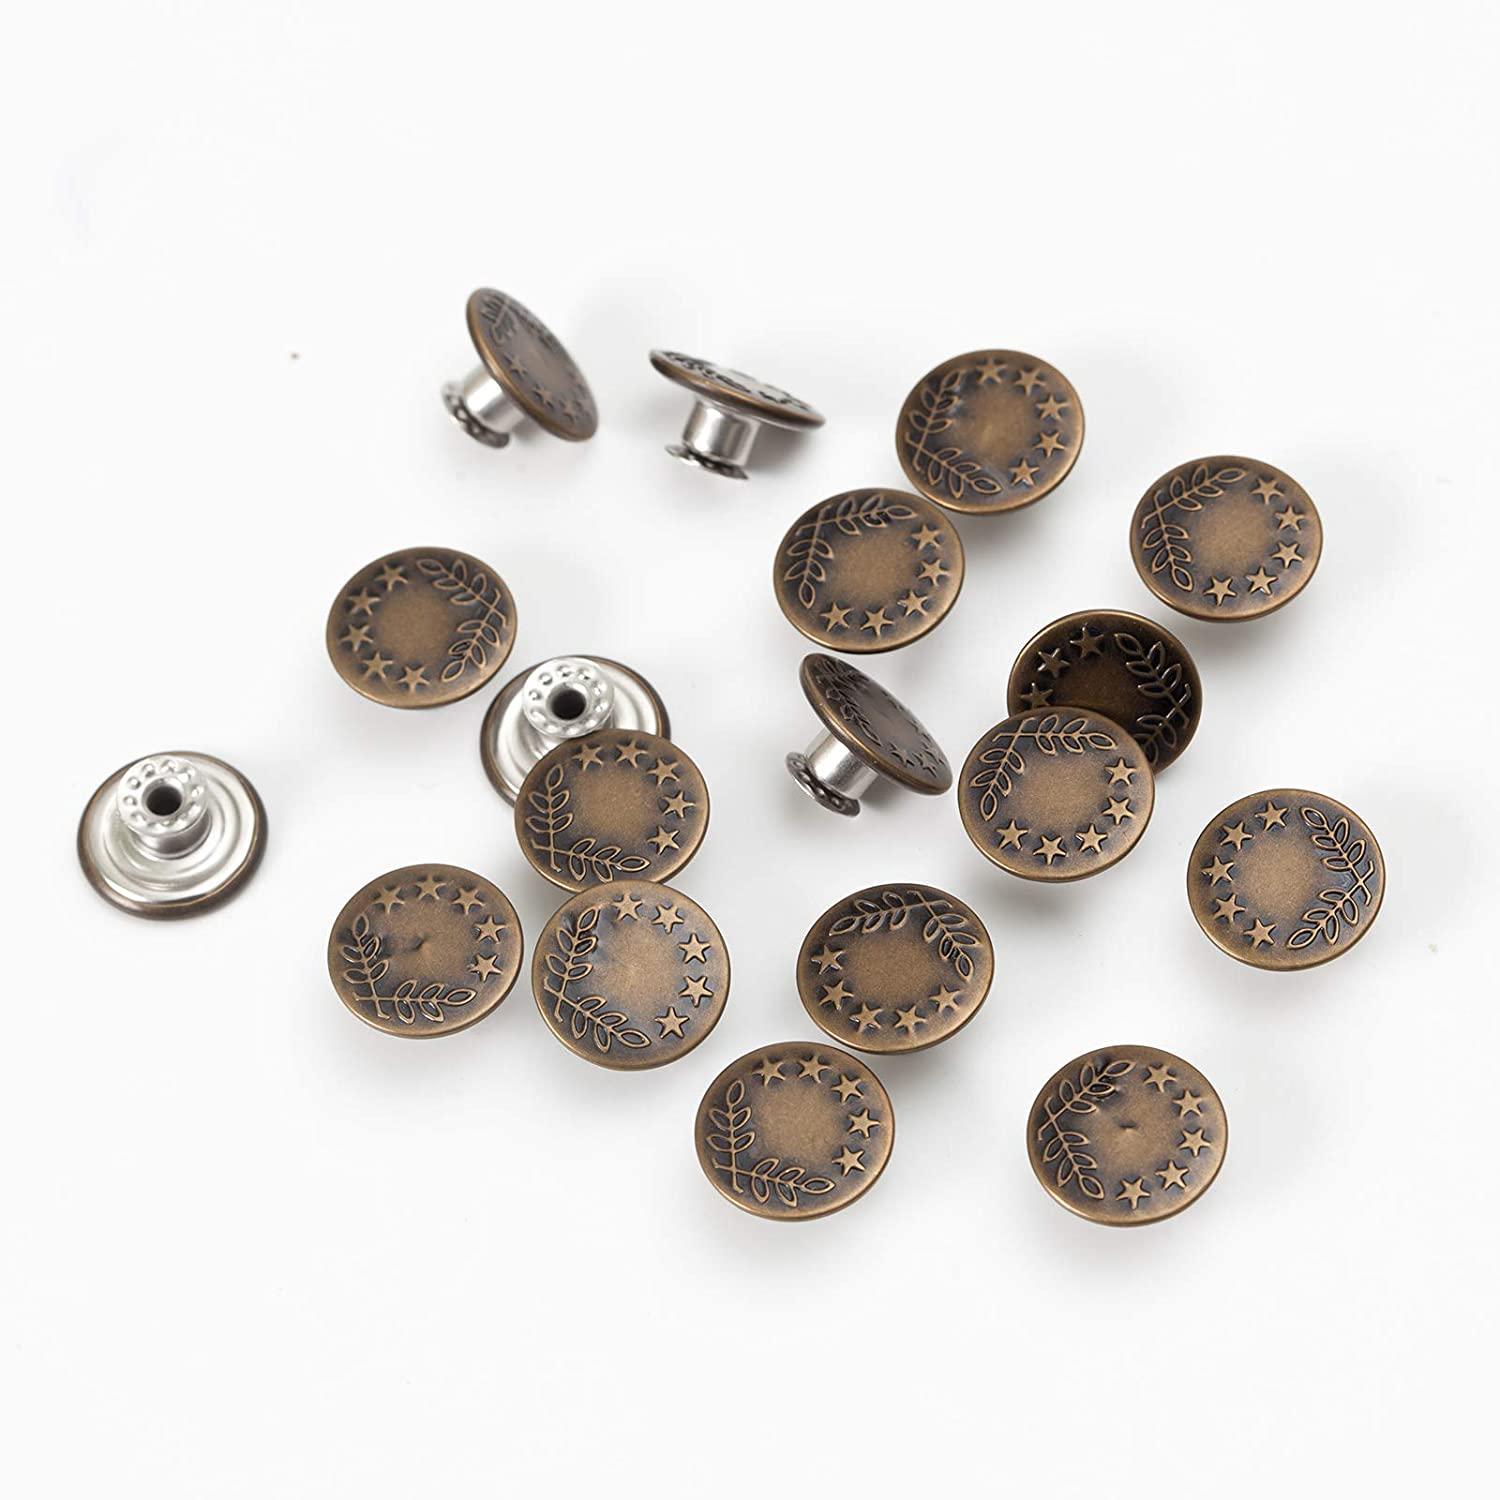 20 Sets 17mm Replacement Jeans Buttons Pants Metal Button Snap Denim  Buttons Replacement Kit Suspender No Sew Buttons with Rivets  metallic_17mm_5star2Leaves 0.67inch(17mm)